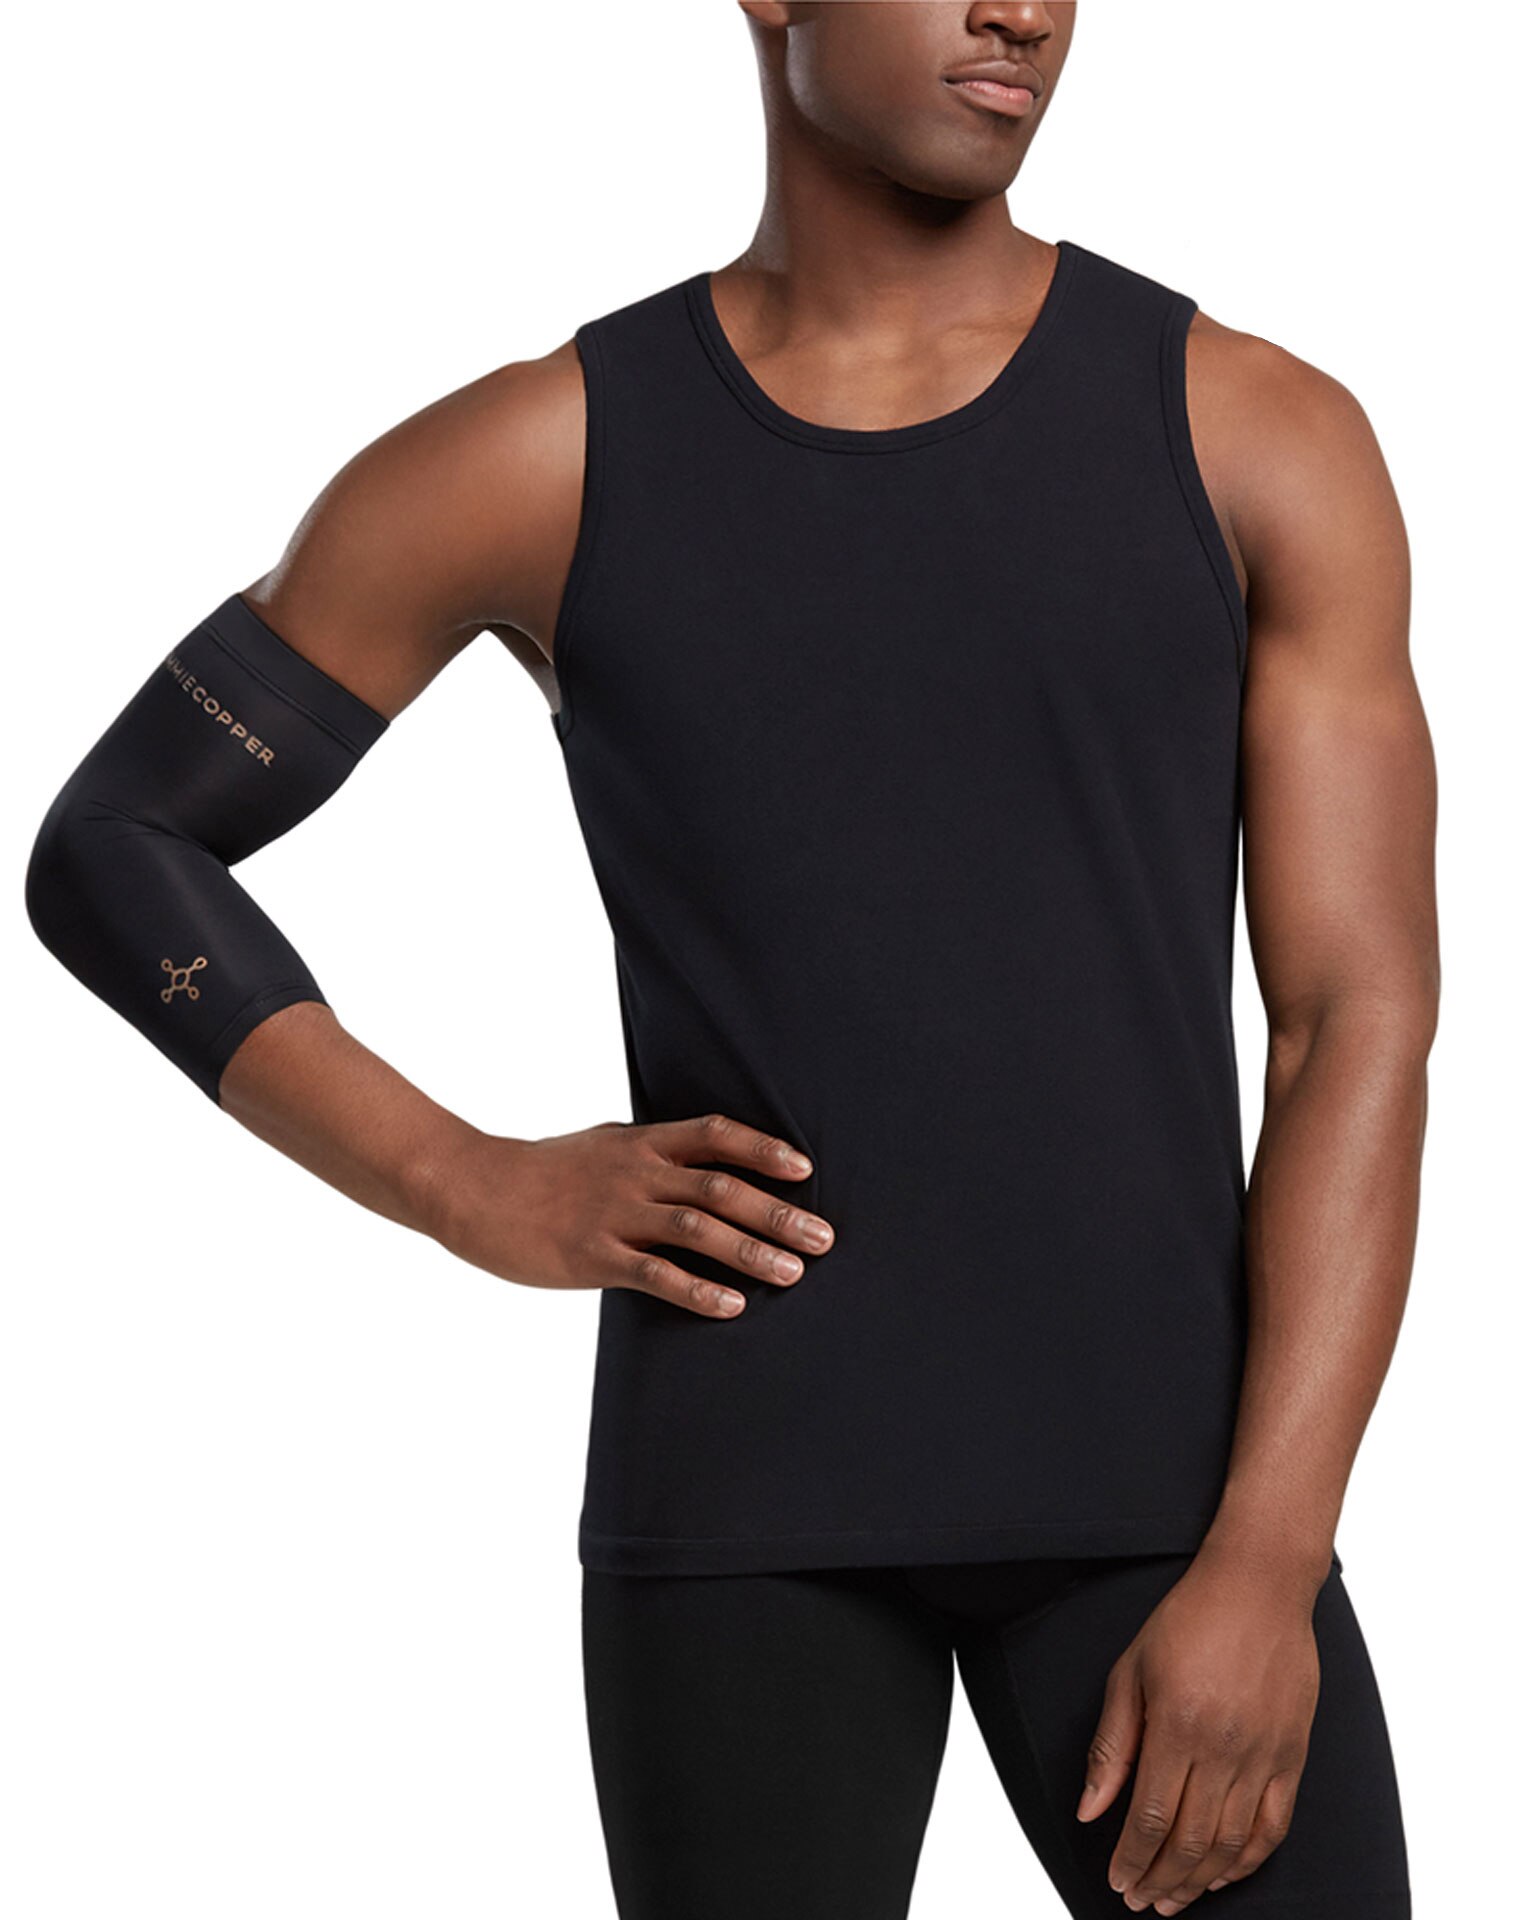 tommie copper elbow compression sleeve reviews